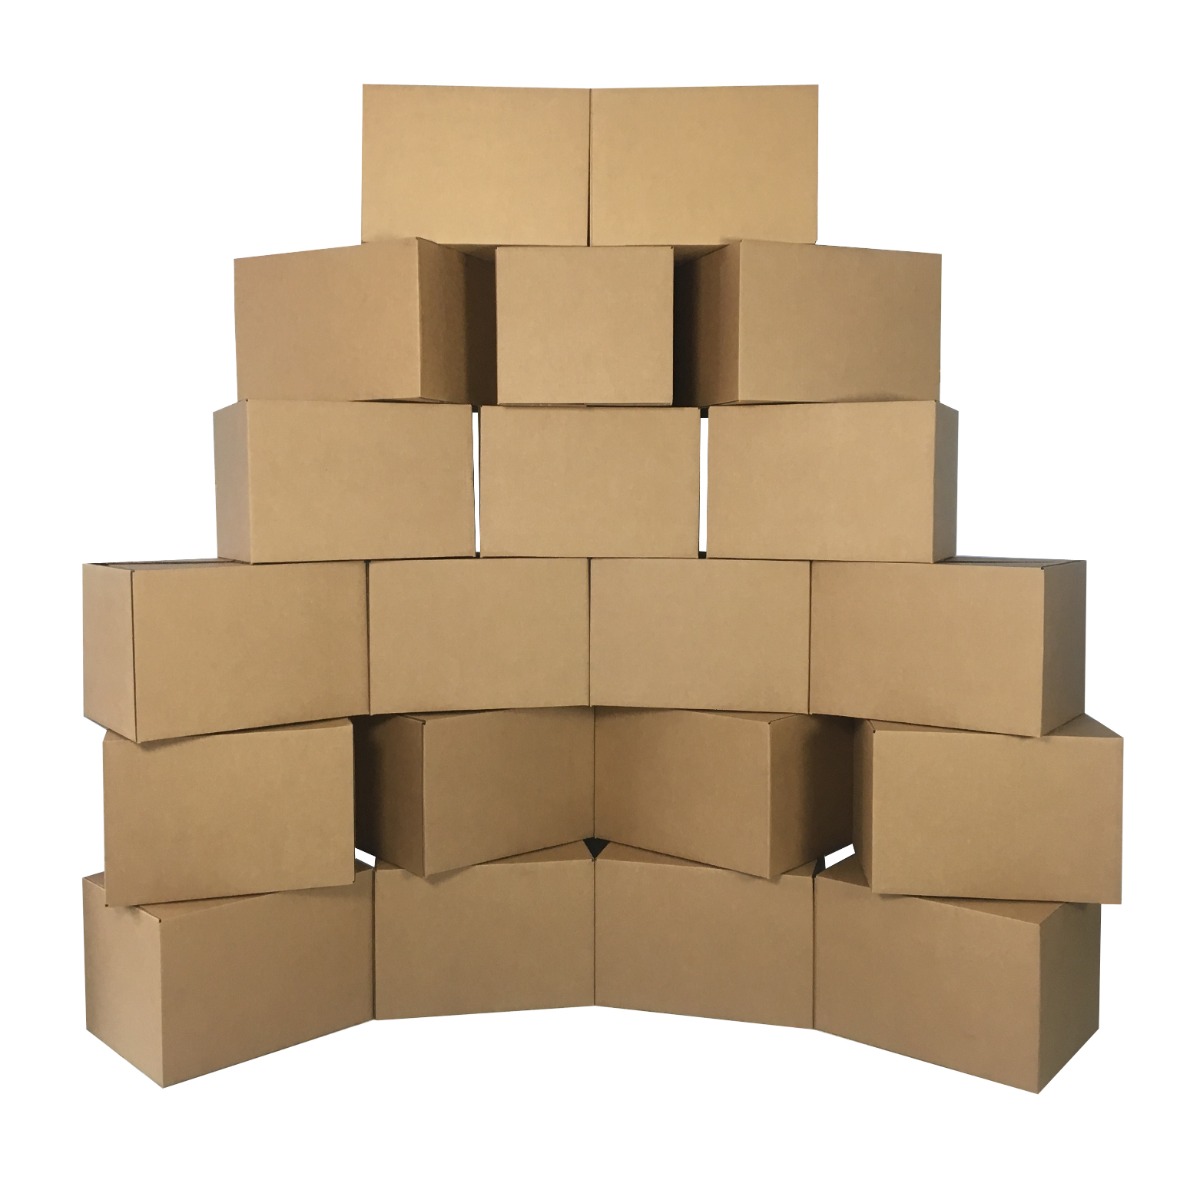 Brown 18 x 18 x 24 Uboxes Moving Boxes with Handles 10 Premium Large BOXINDSLAR10 